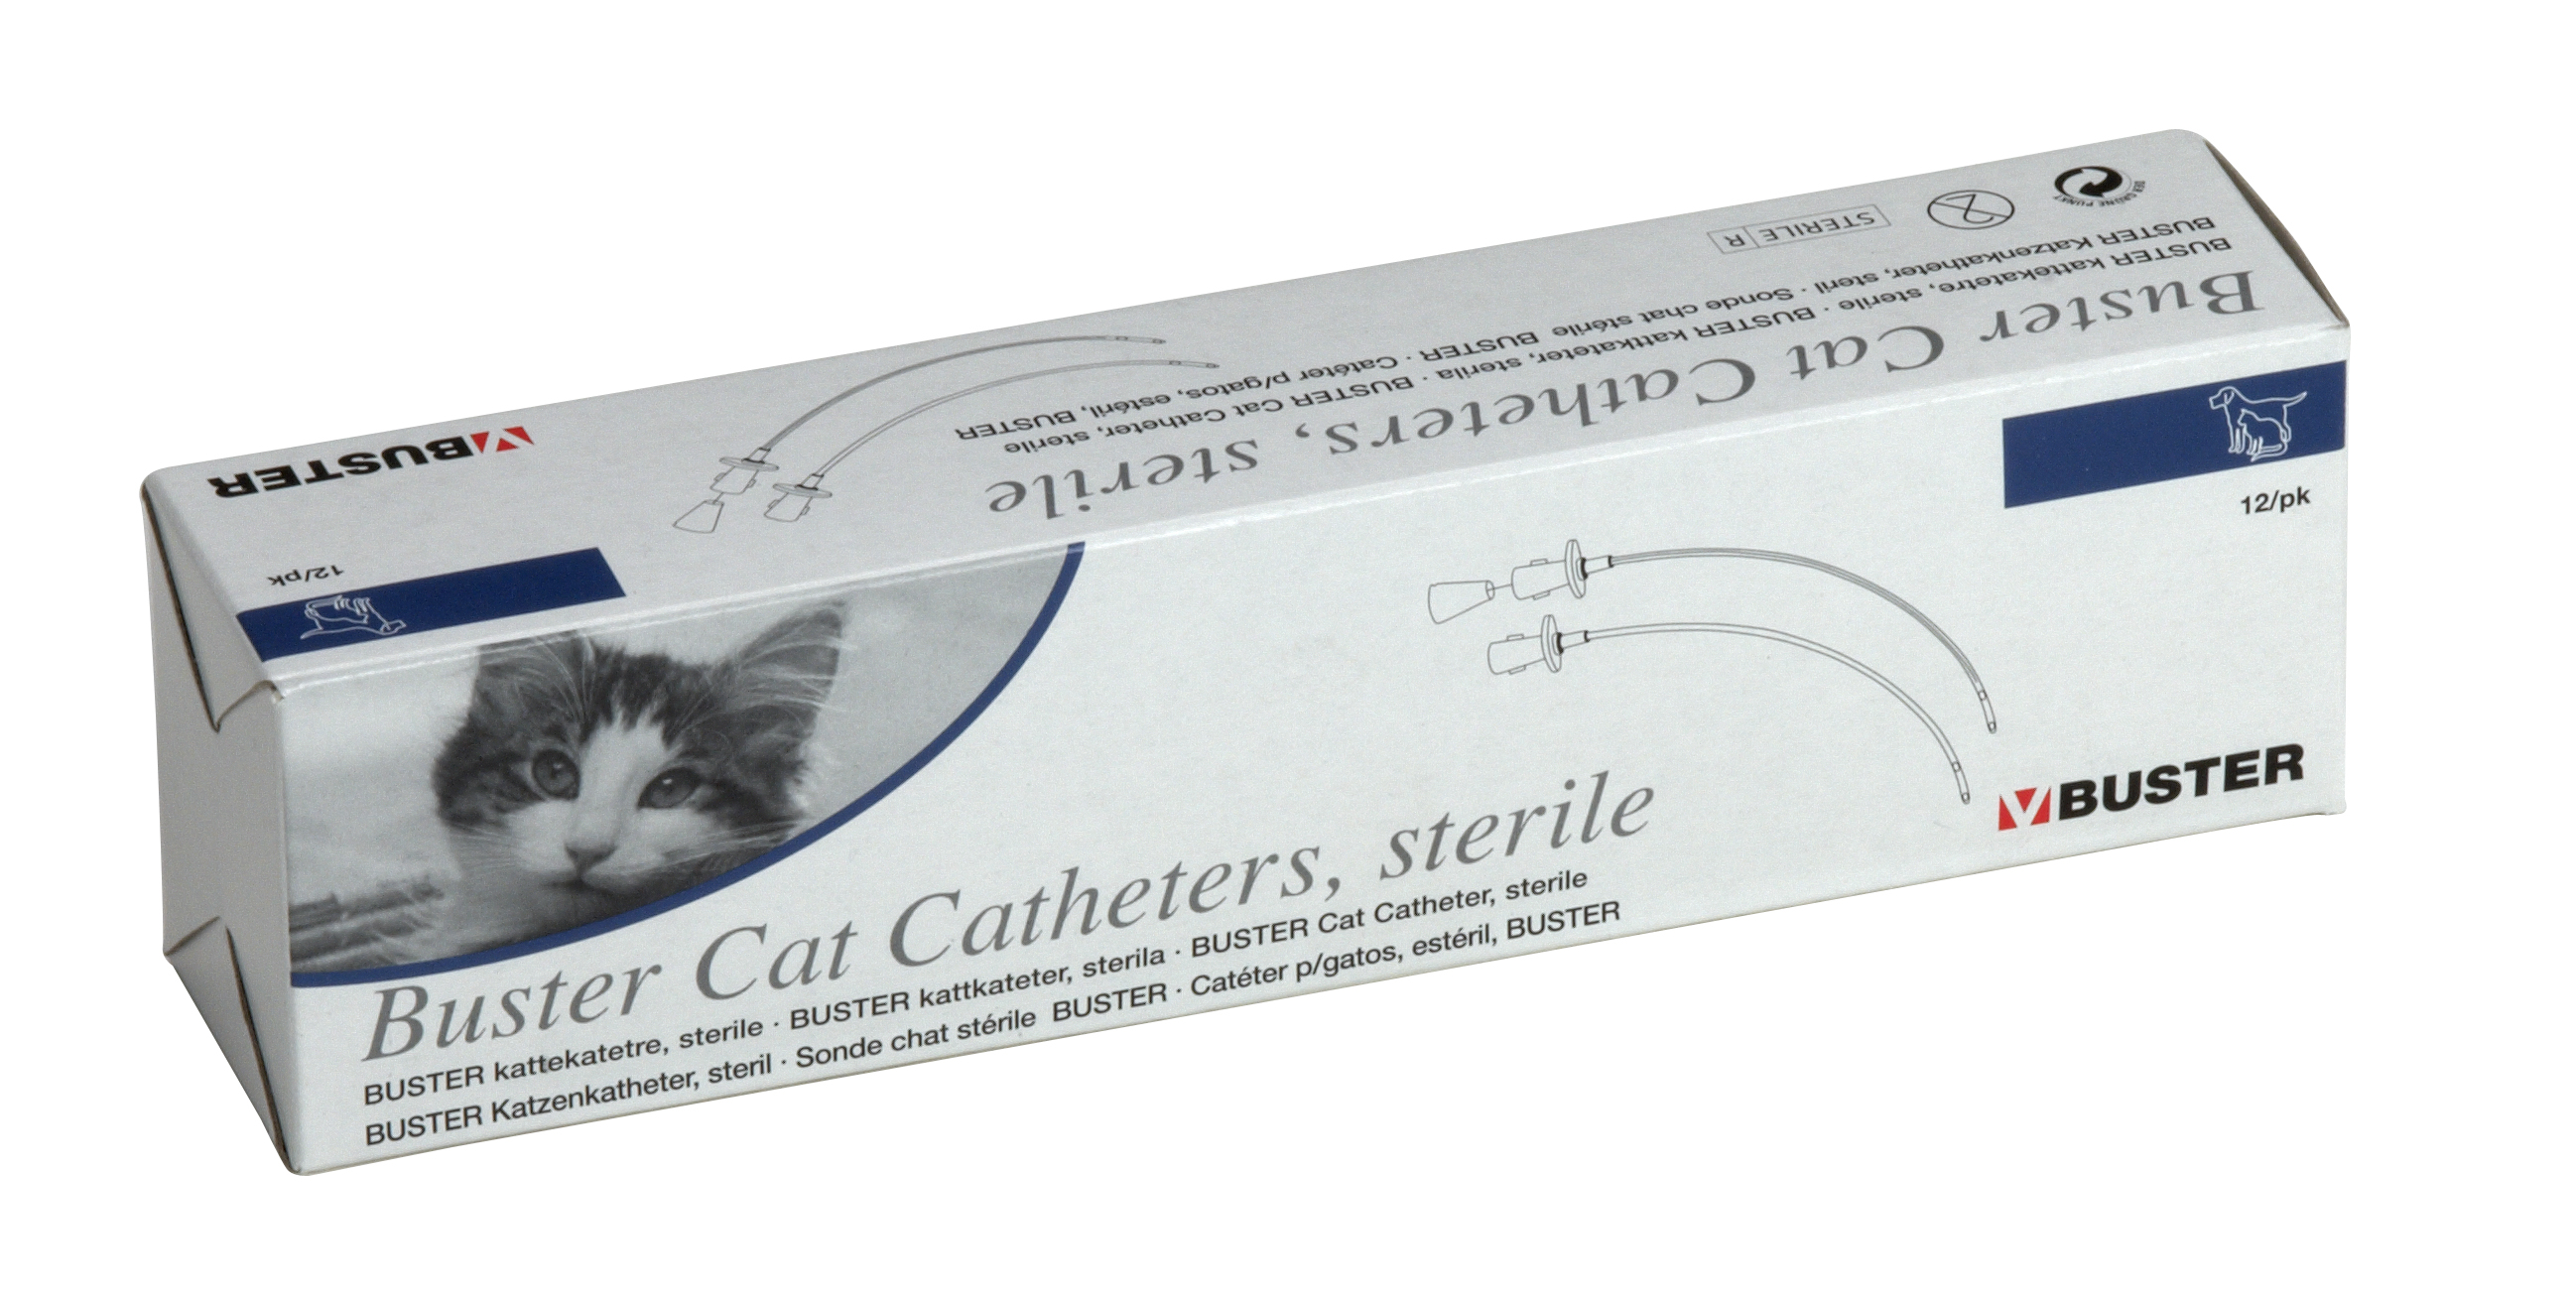 BUSTER cat catheter w/stylet sterile, 1.0x130 mm